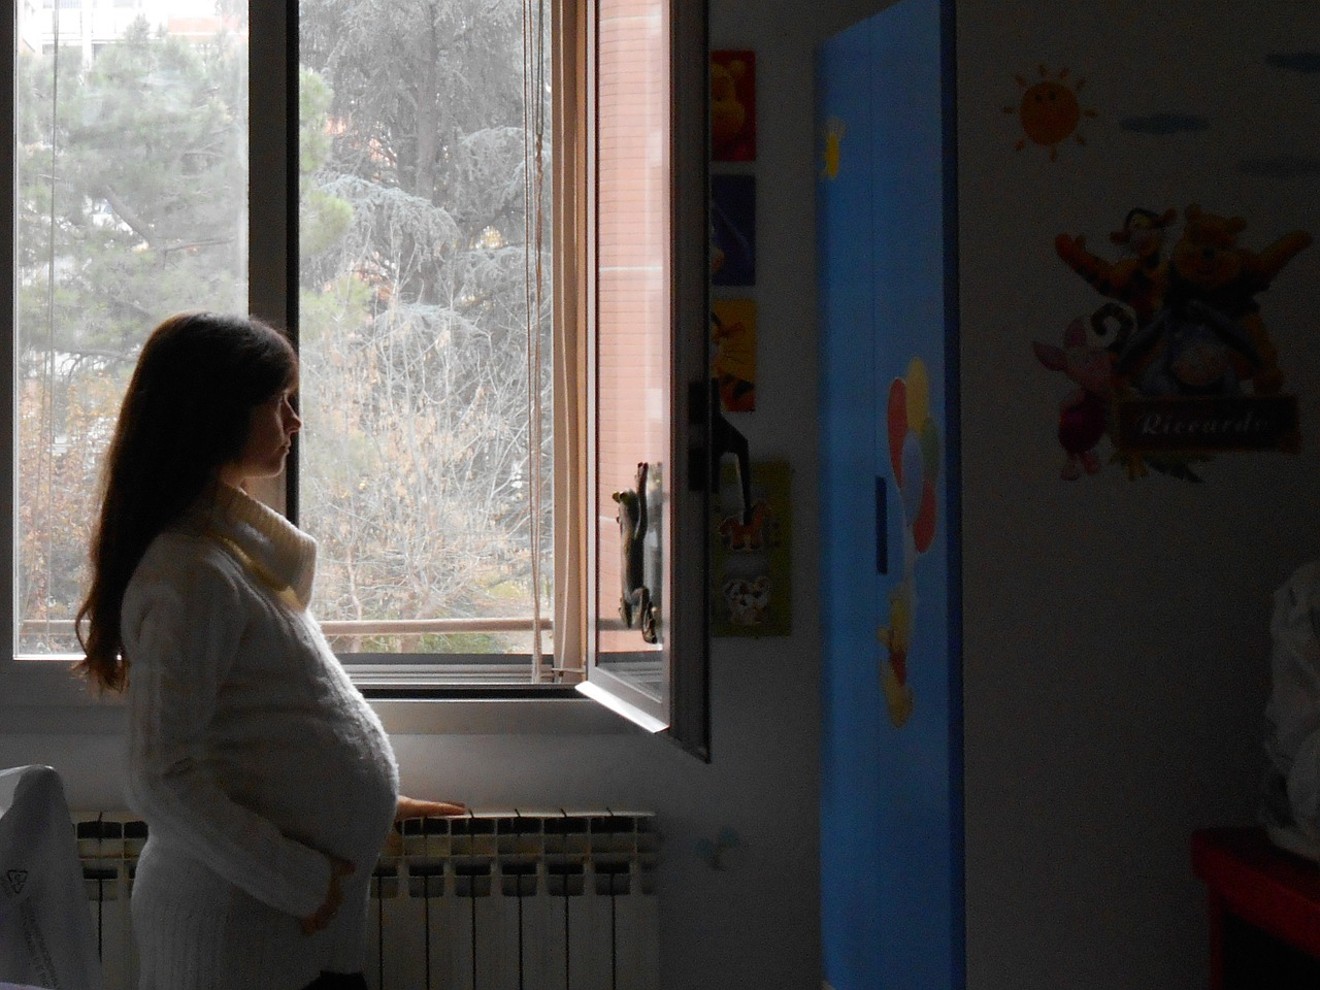 In 2014, about 9 percent of Colorado women who gave birth reported experiencing postpartum depression, according to the Colorado Behavioral Risk Factor Surveillance System.